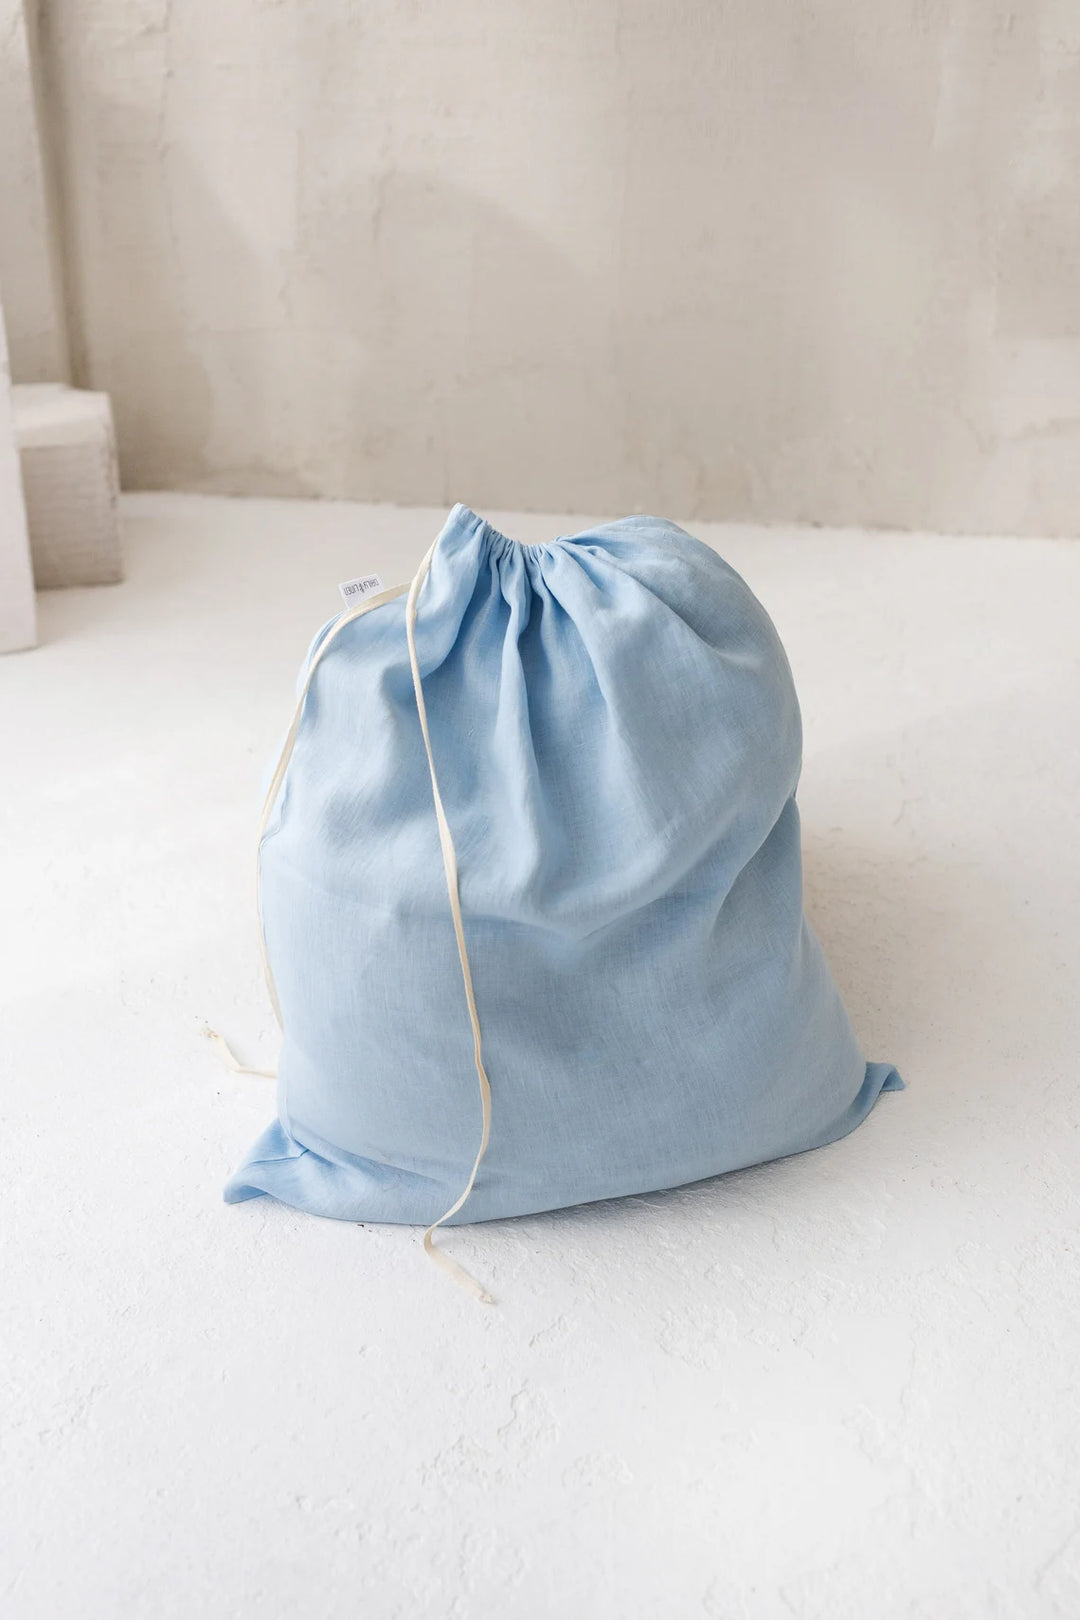 Linen Laundry Bag In Sky Blue Color - Daily Linen